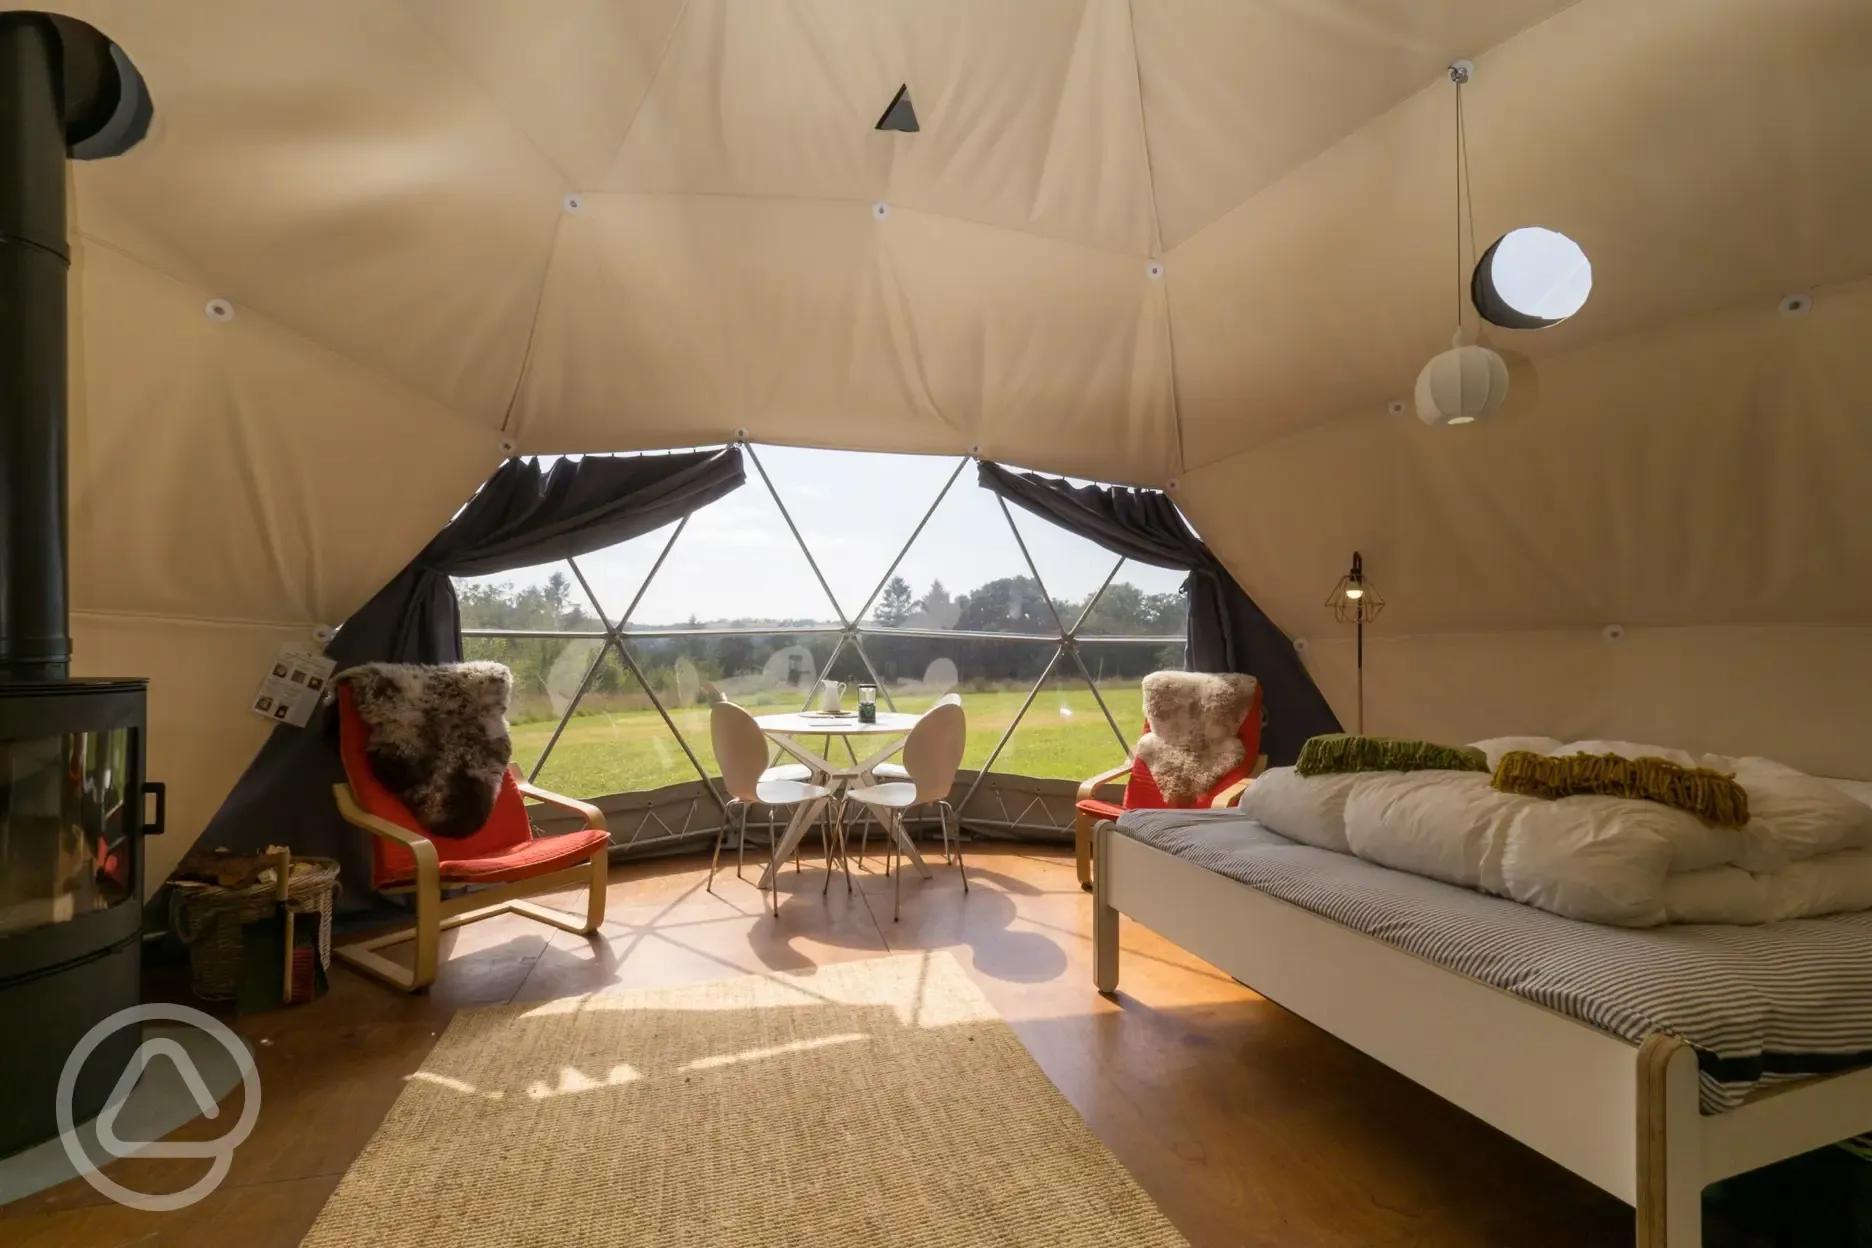 Inside our glamping Nature Domes, everything is included for your gllamping stay 